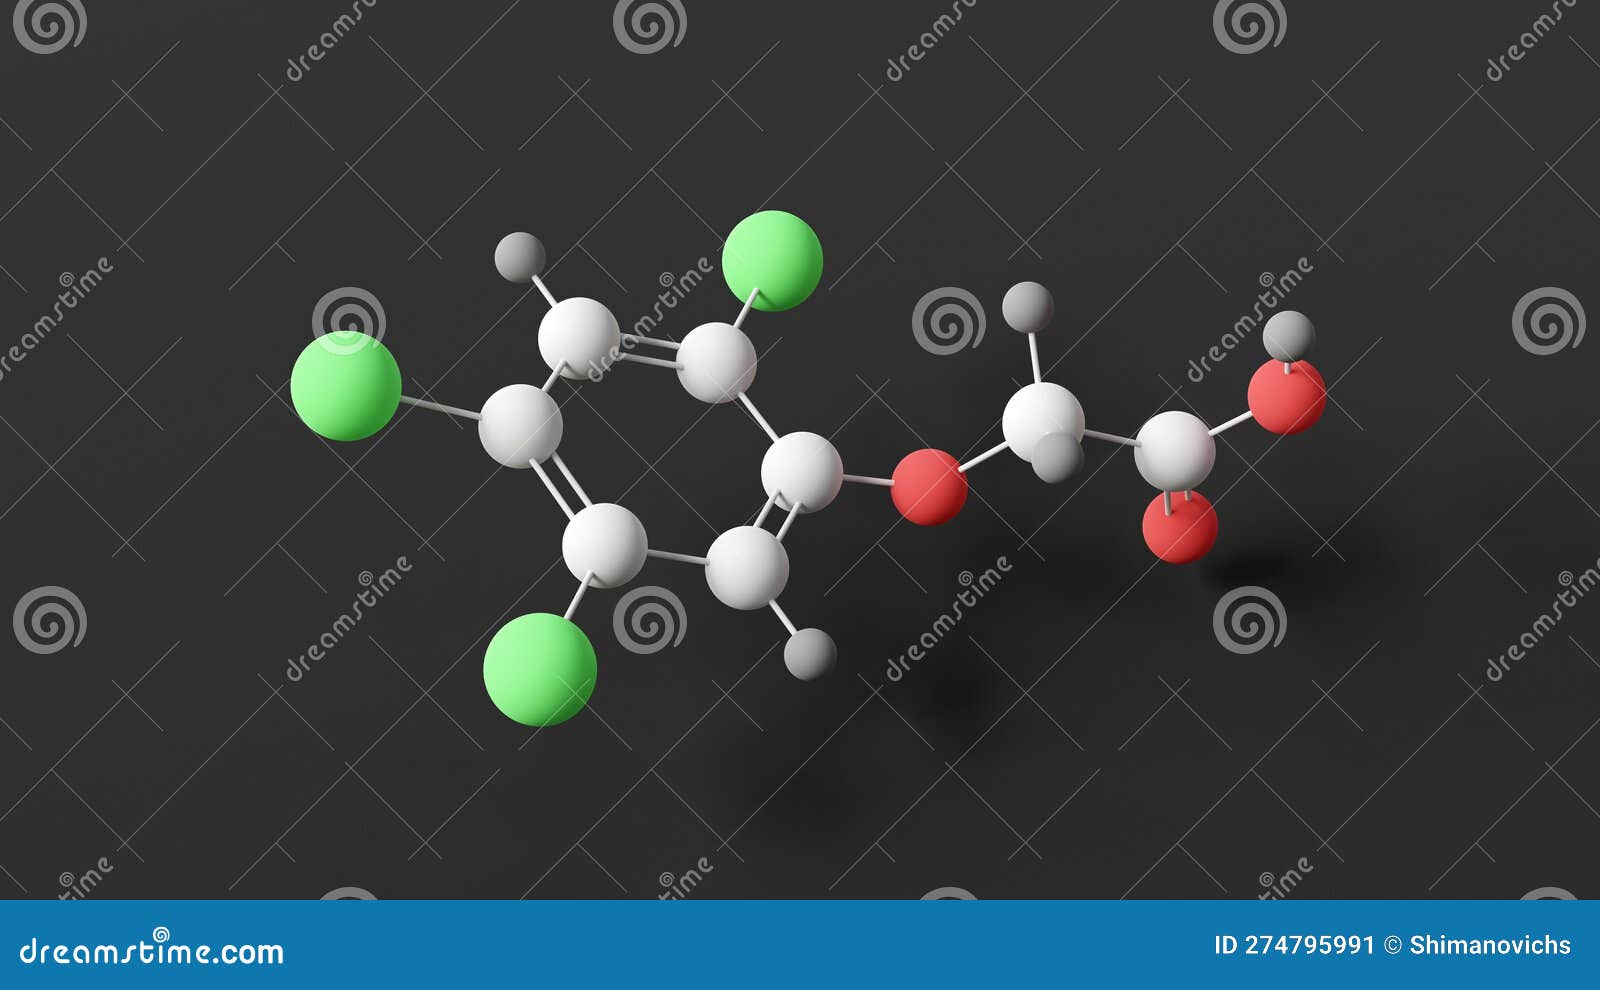 2,4,5-trichlorophenoxyacetic acid molecule, molecular structure, 2,4,5-t, ball and stick 3d model, structural chemical formula